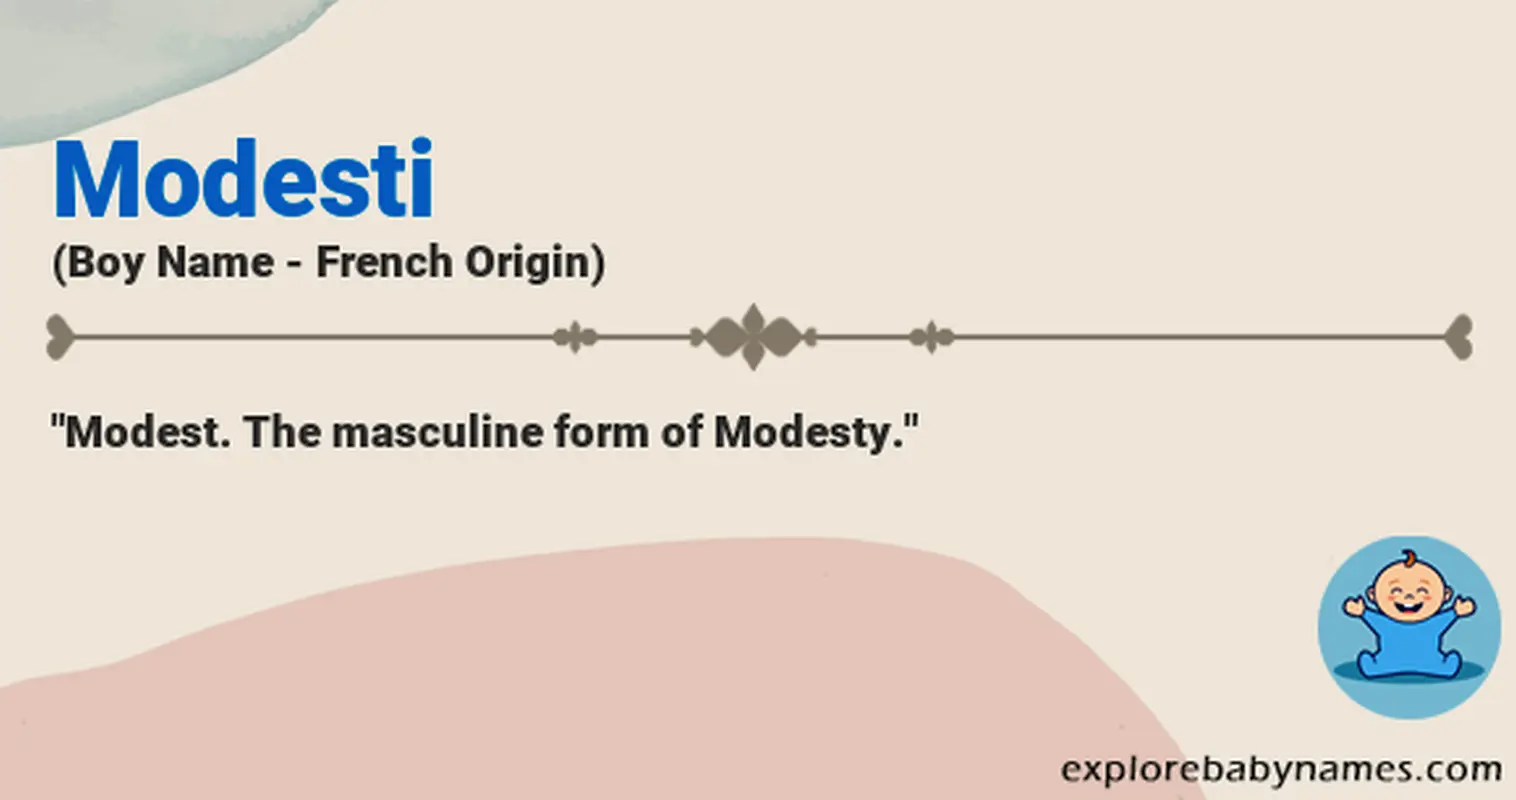 Meaning of Modesti